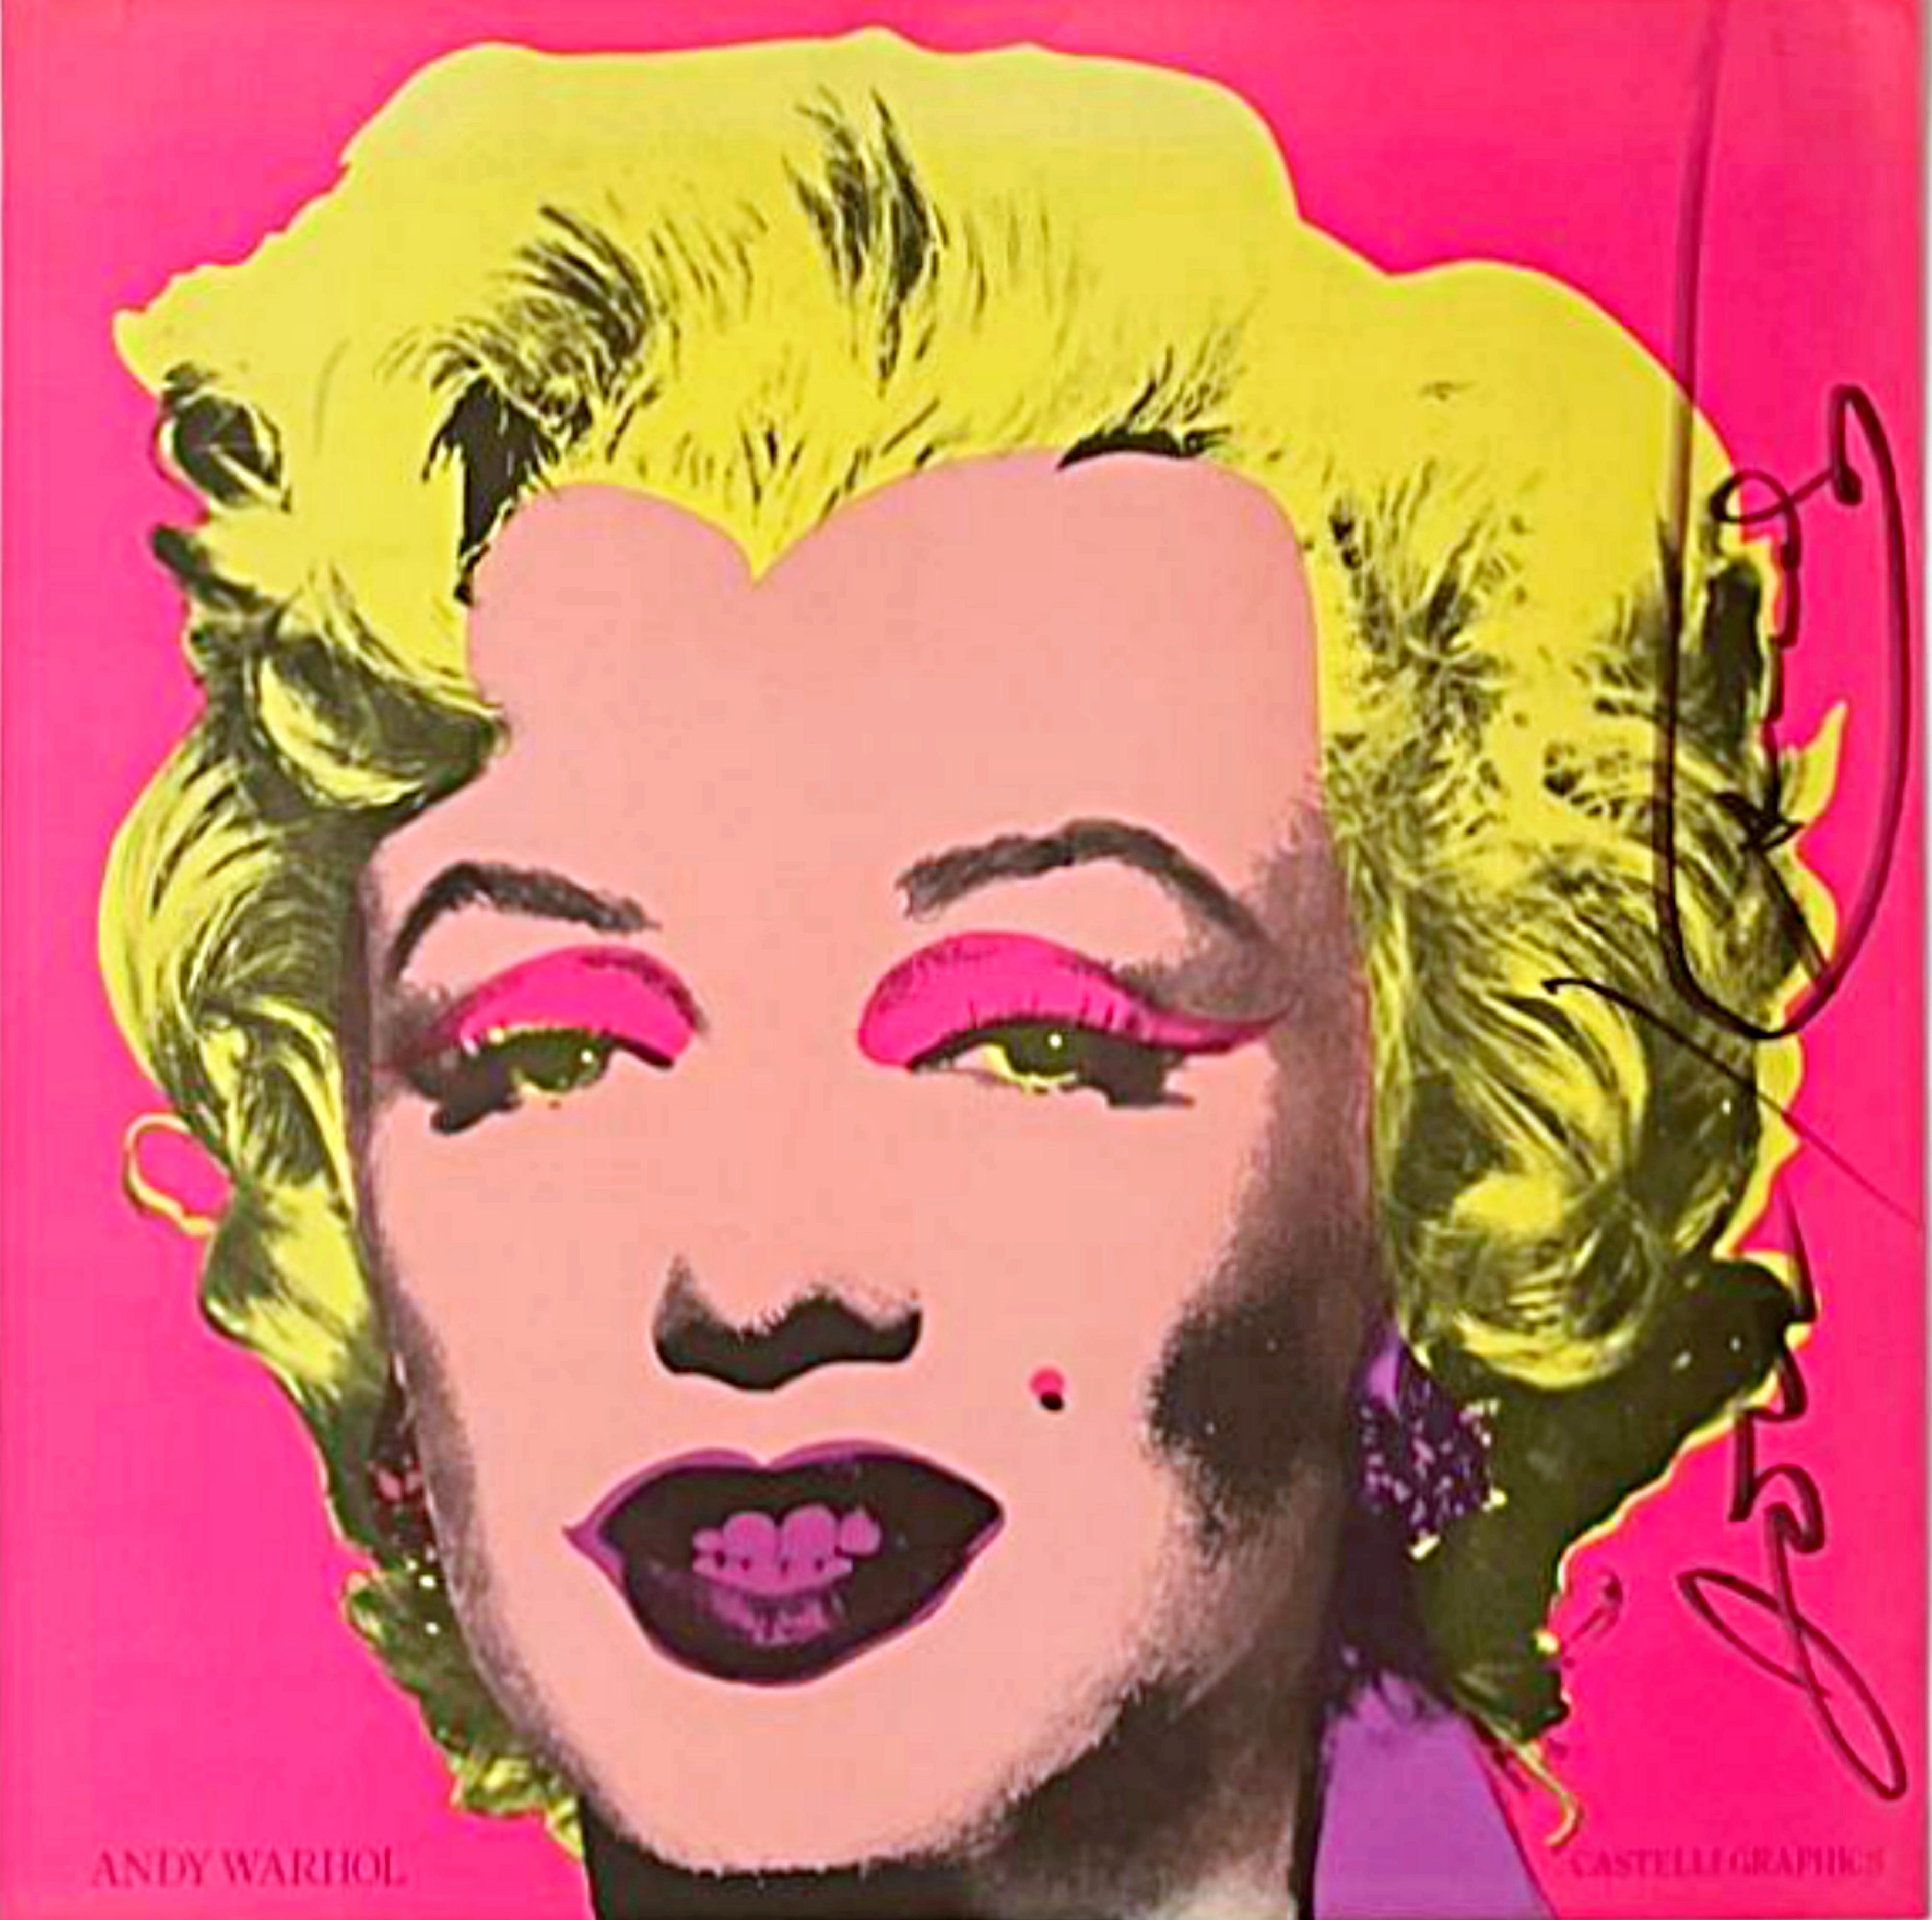 Marilyn at Leo Castelli (Large), signed and inscribed by Warhol to Jon Gould 